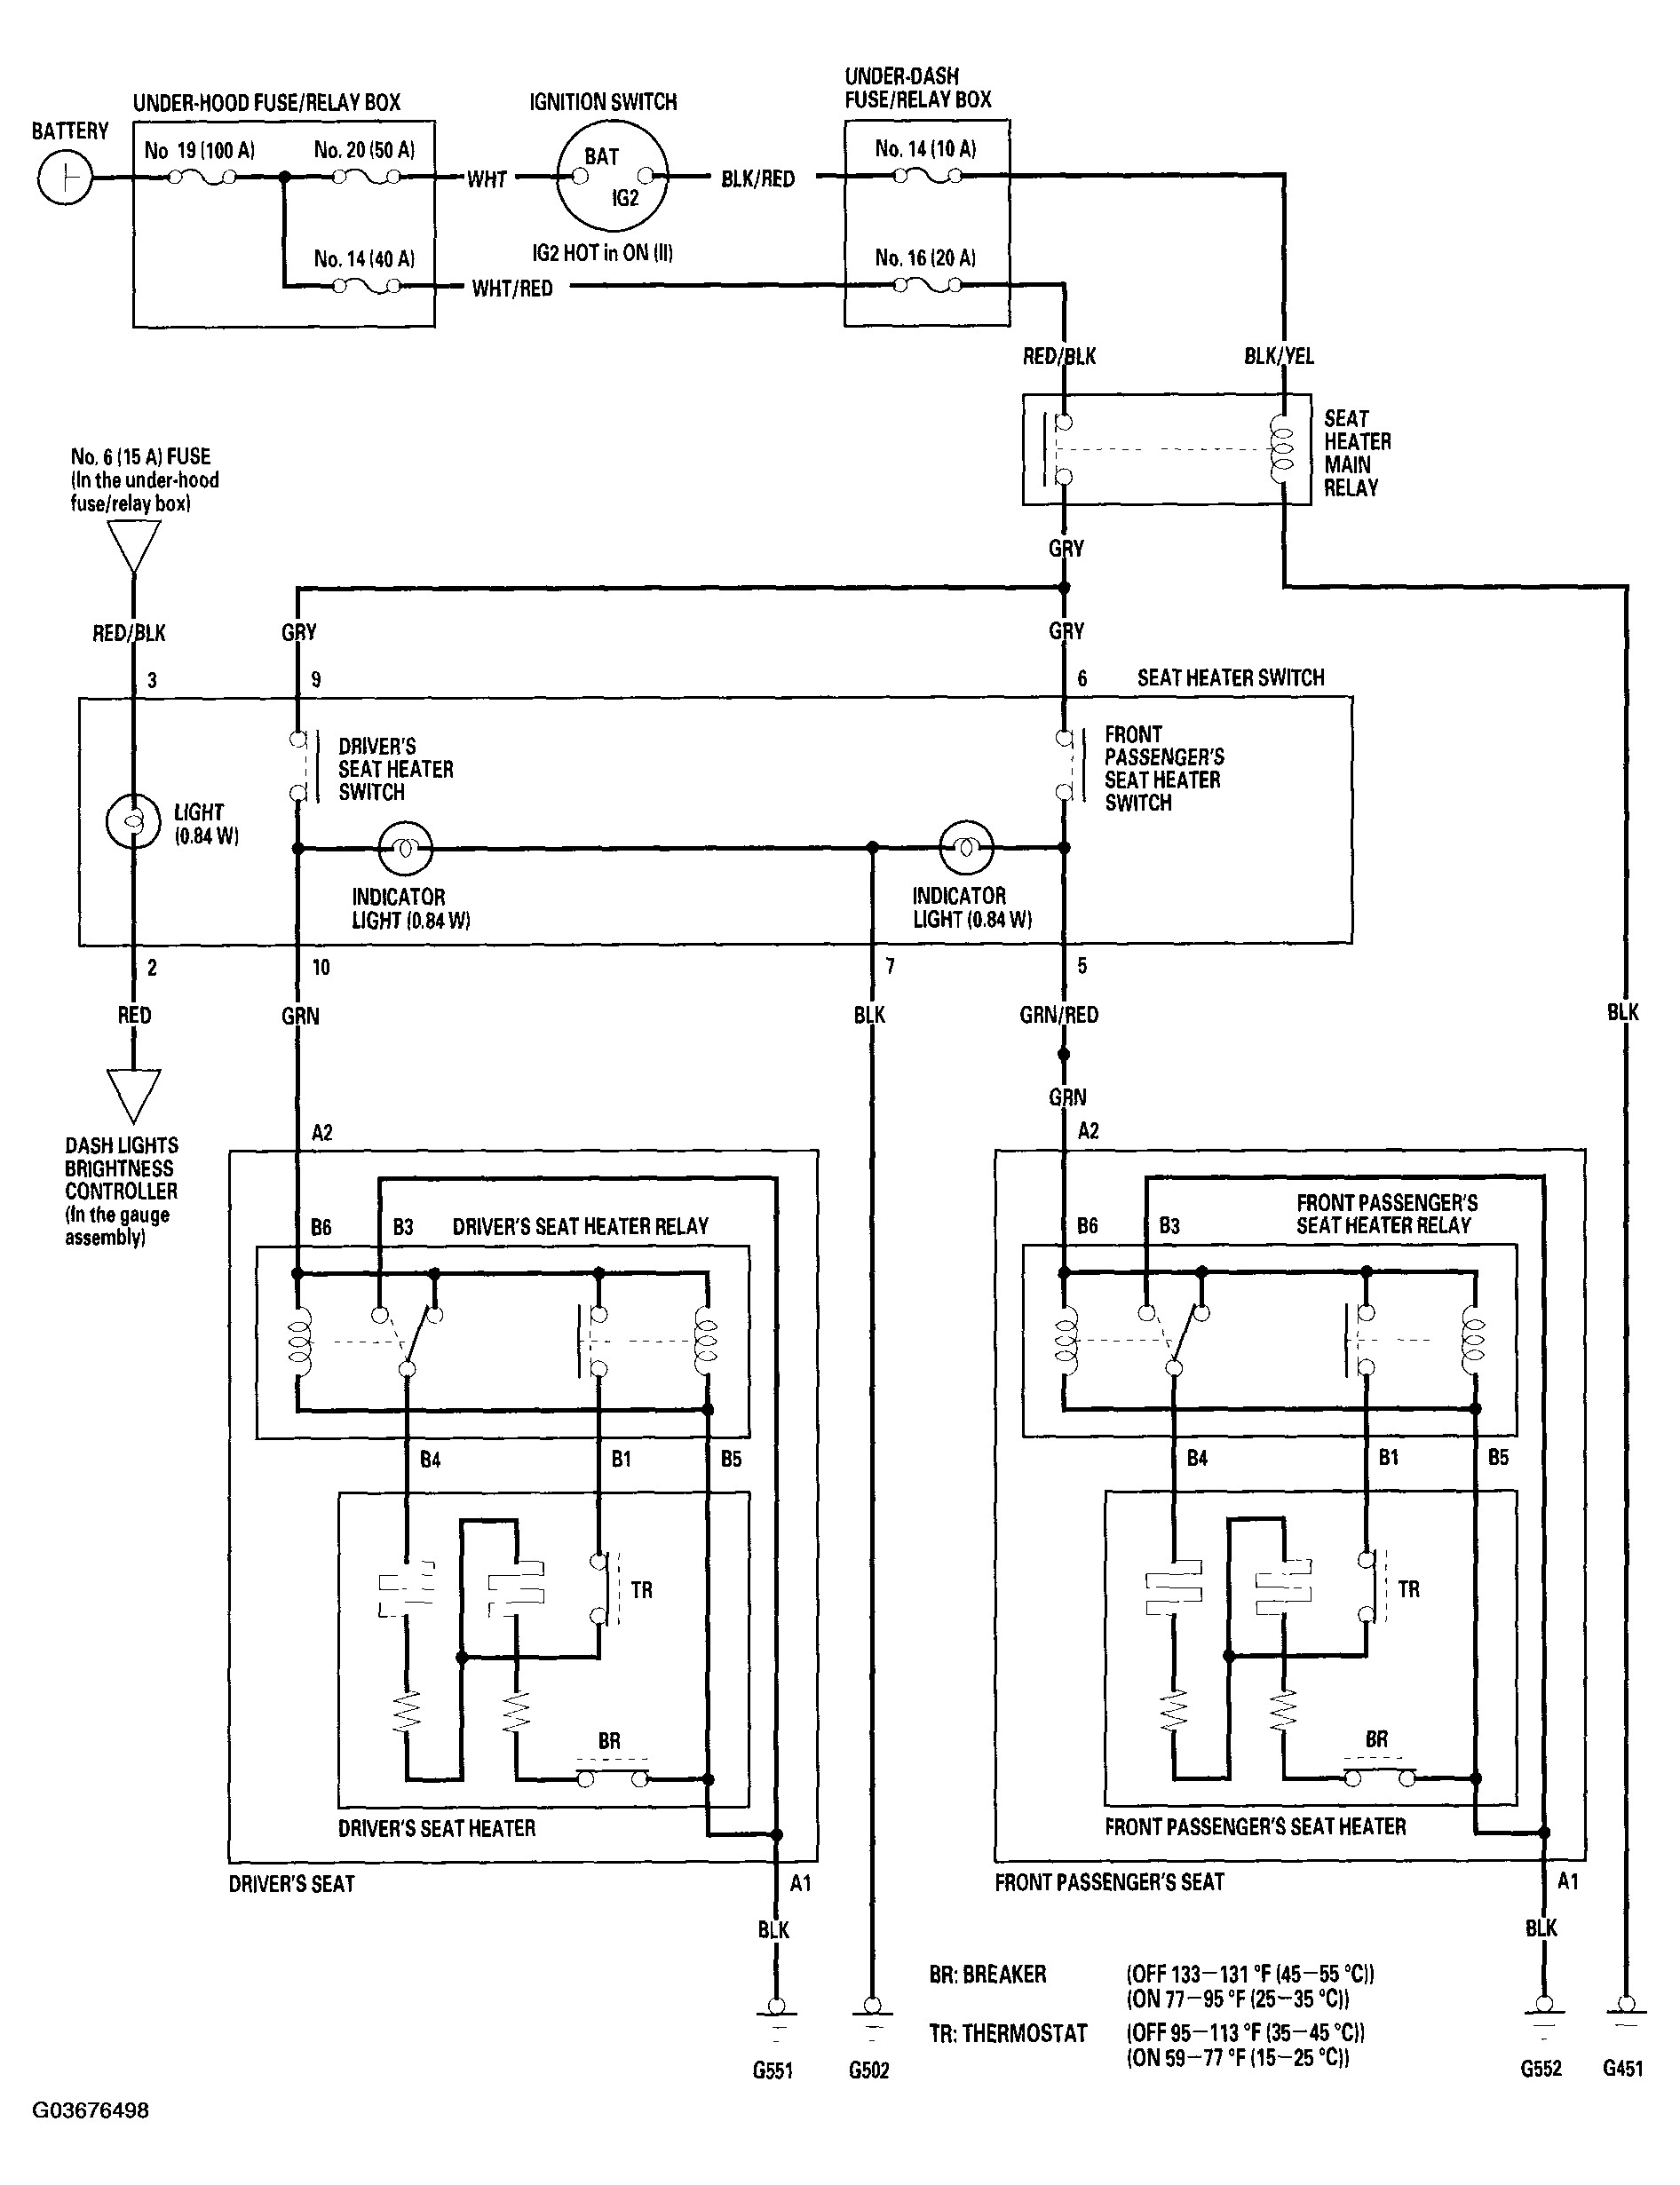 How to Wire A Fuse Box Diagram Cr V Fuse Box Diagram Besides Honda Civic Wiring Diagram 2005 Of How to Wire A Fuse Box Diagram